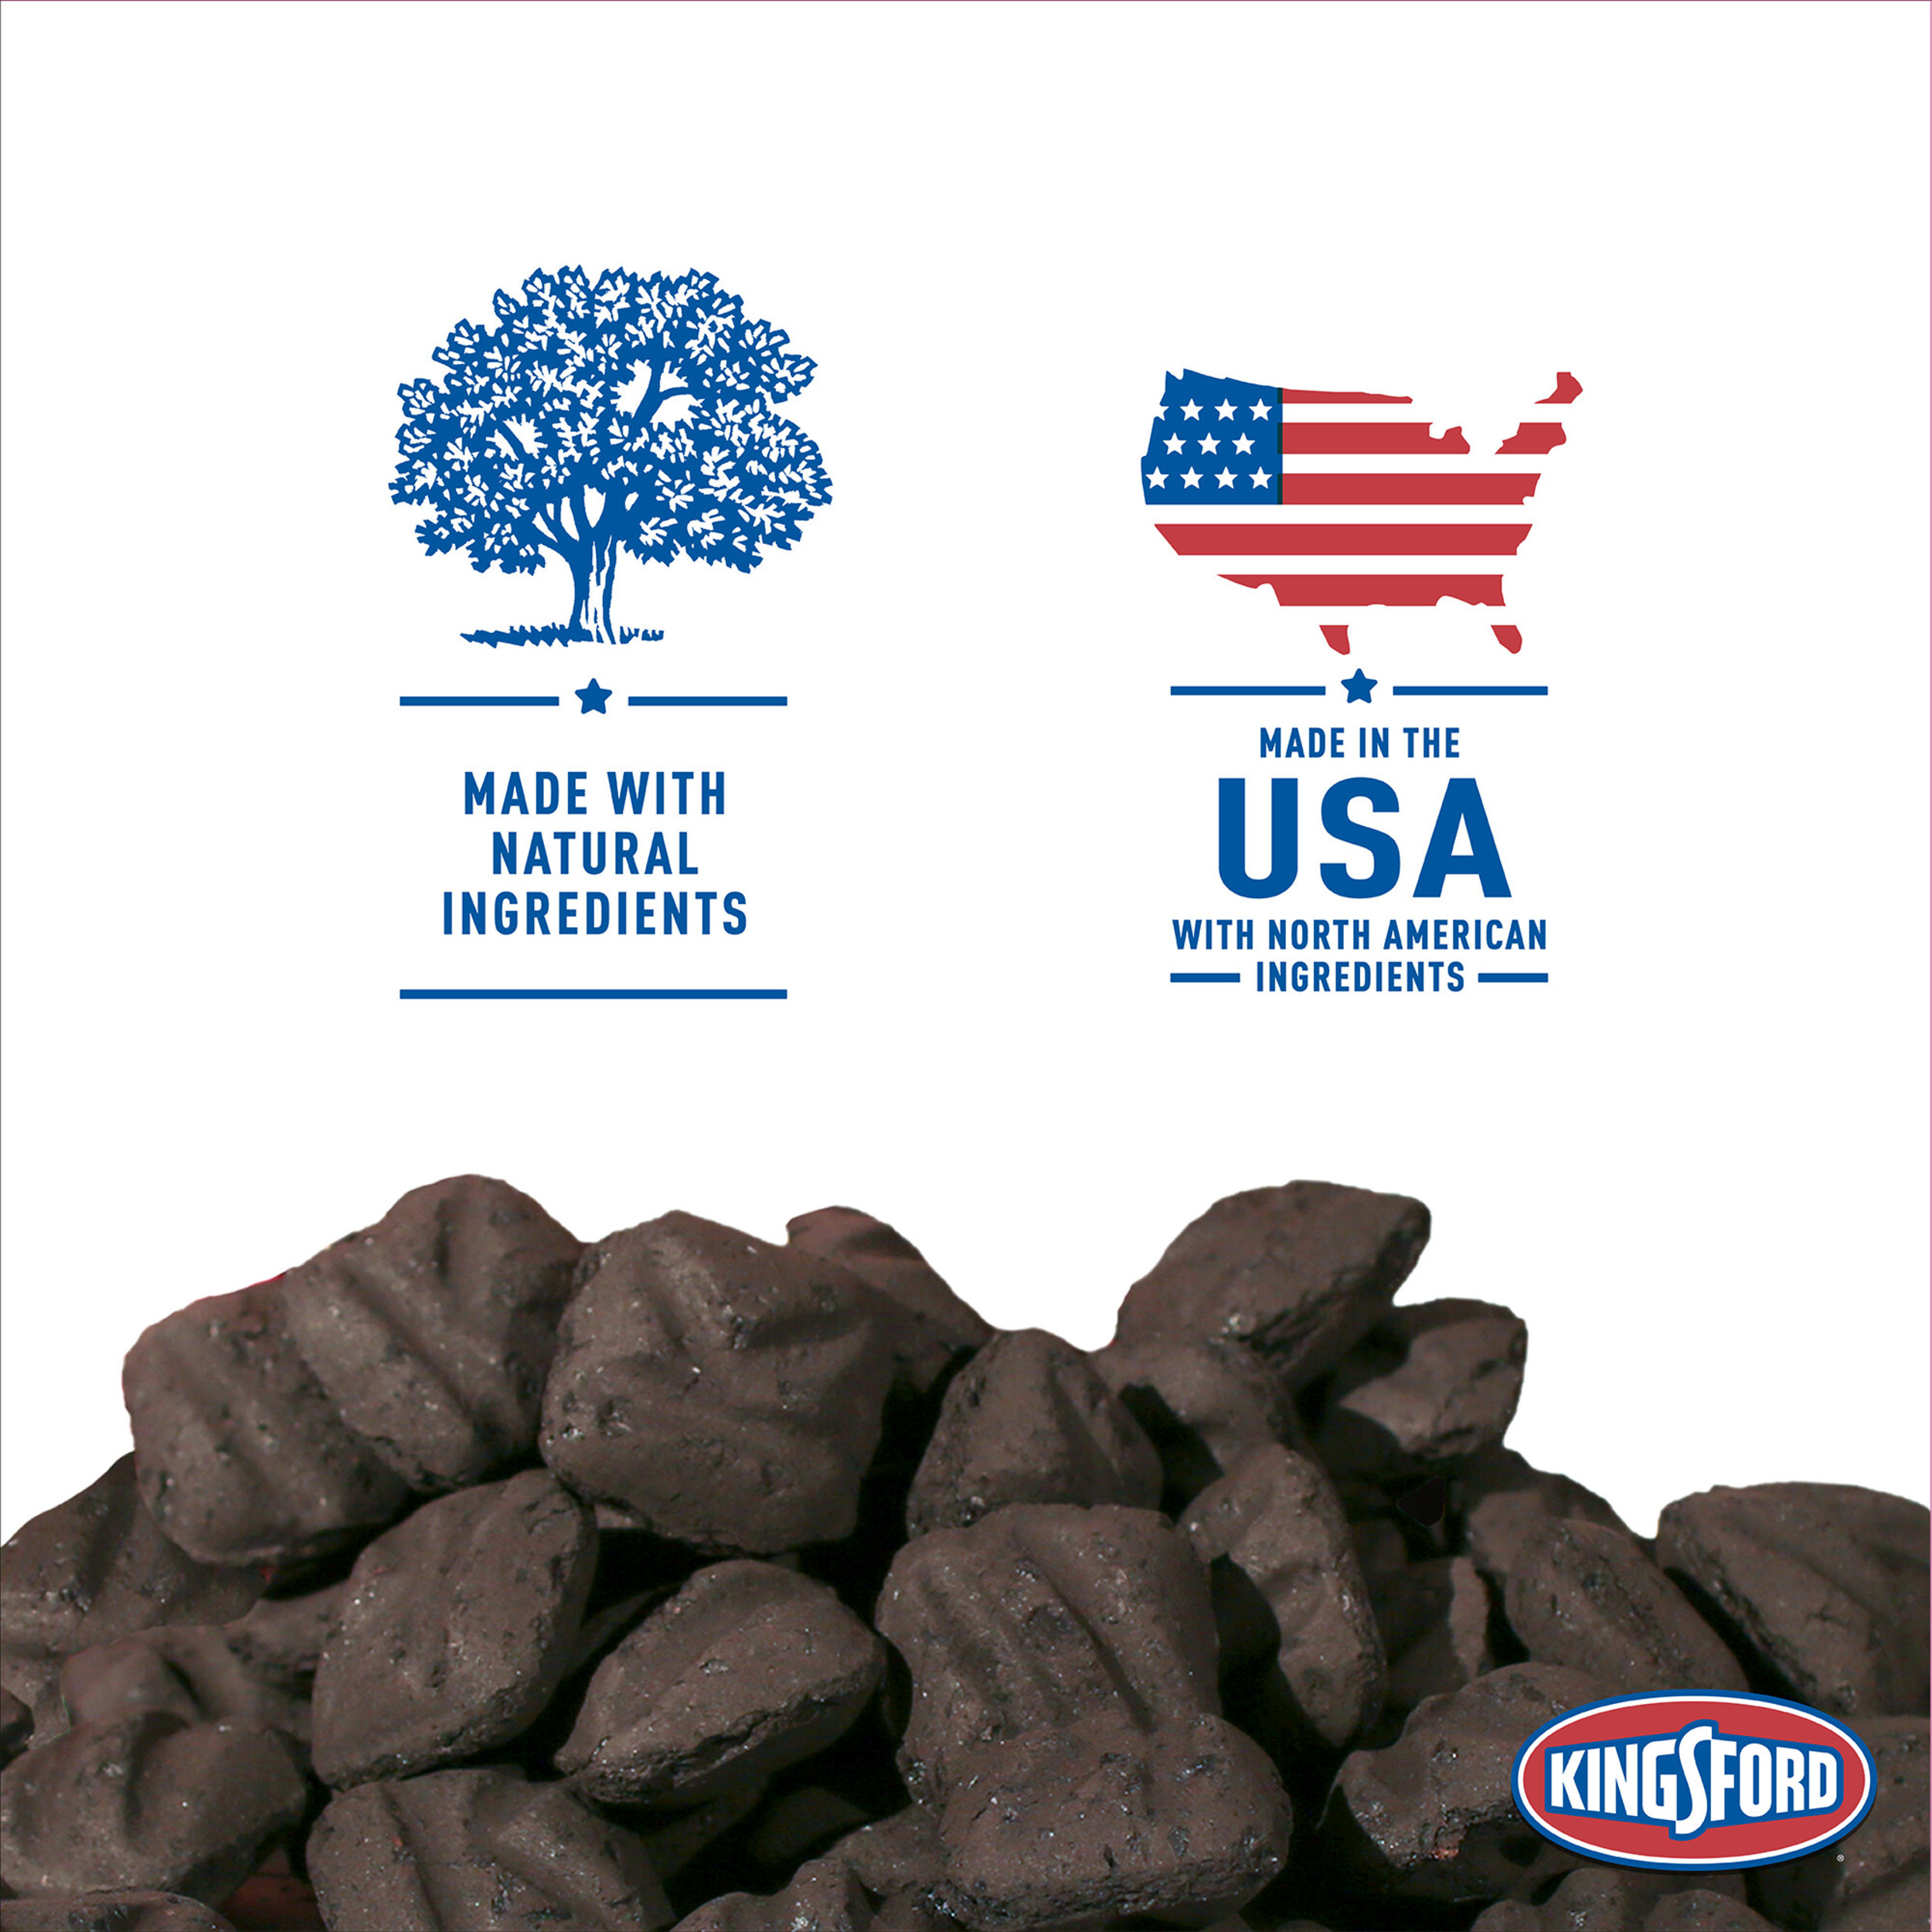 Kingsford Original Charcoal Briquettes, 16 lbs, 2 Pack - image 4 of 9